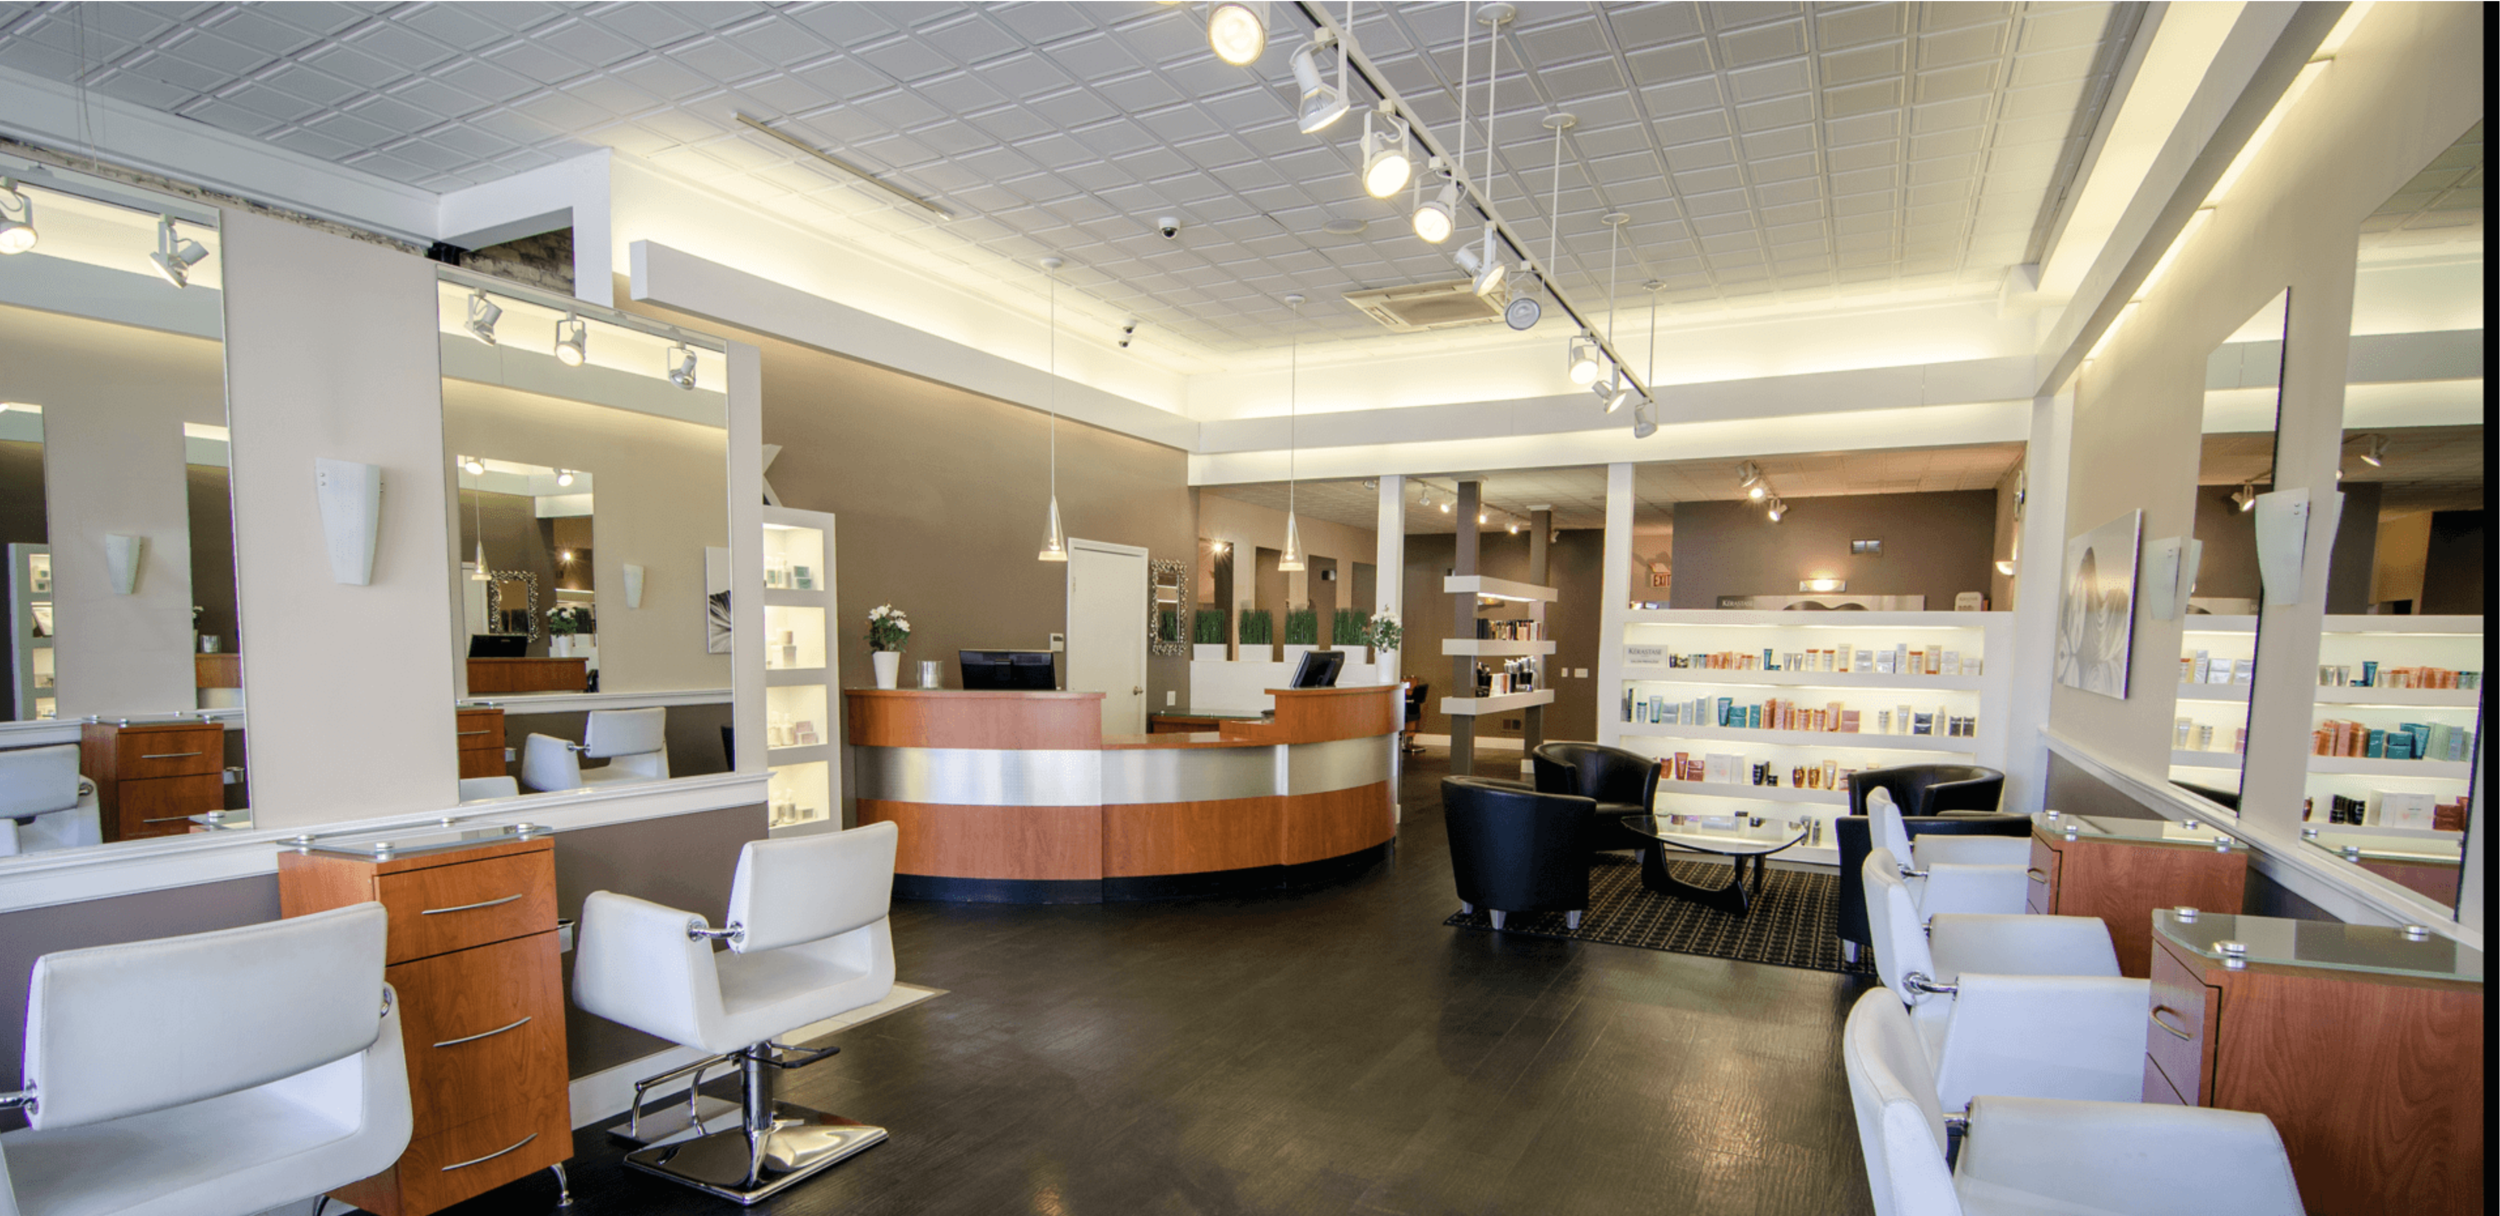 The Nail Bar By J&Q, 535 W Front St, Traverse City, MI - MapQuest